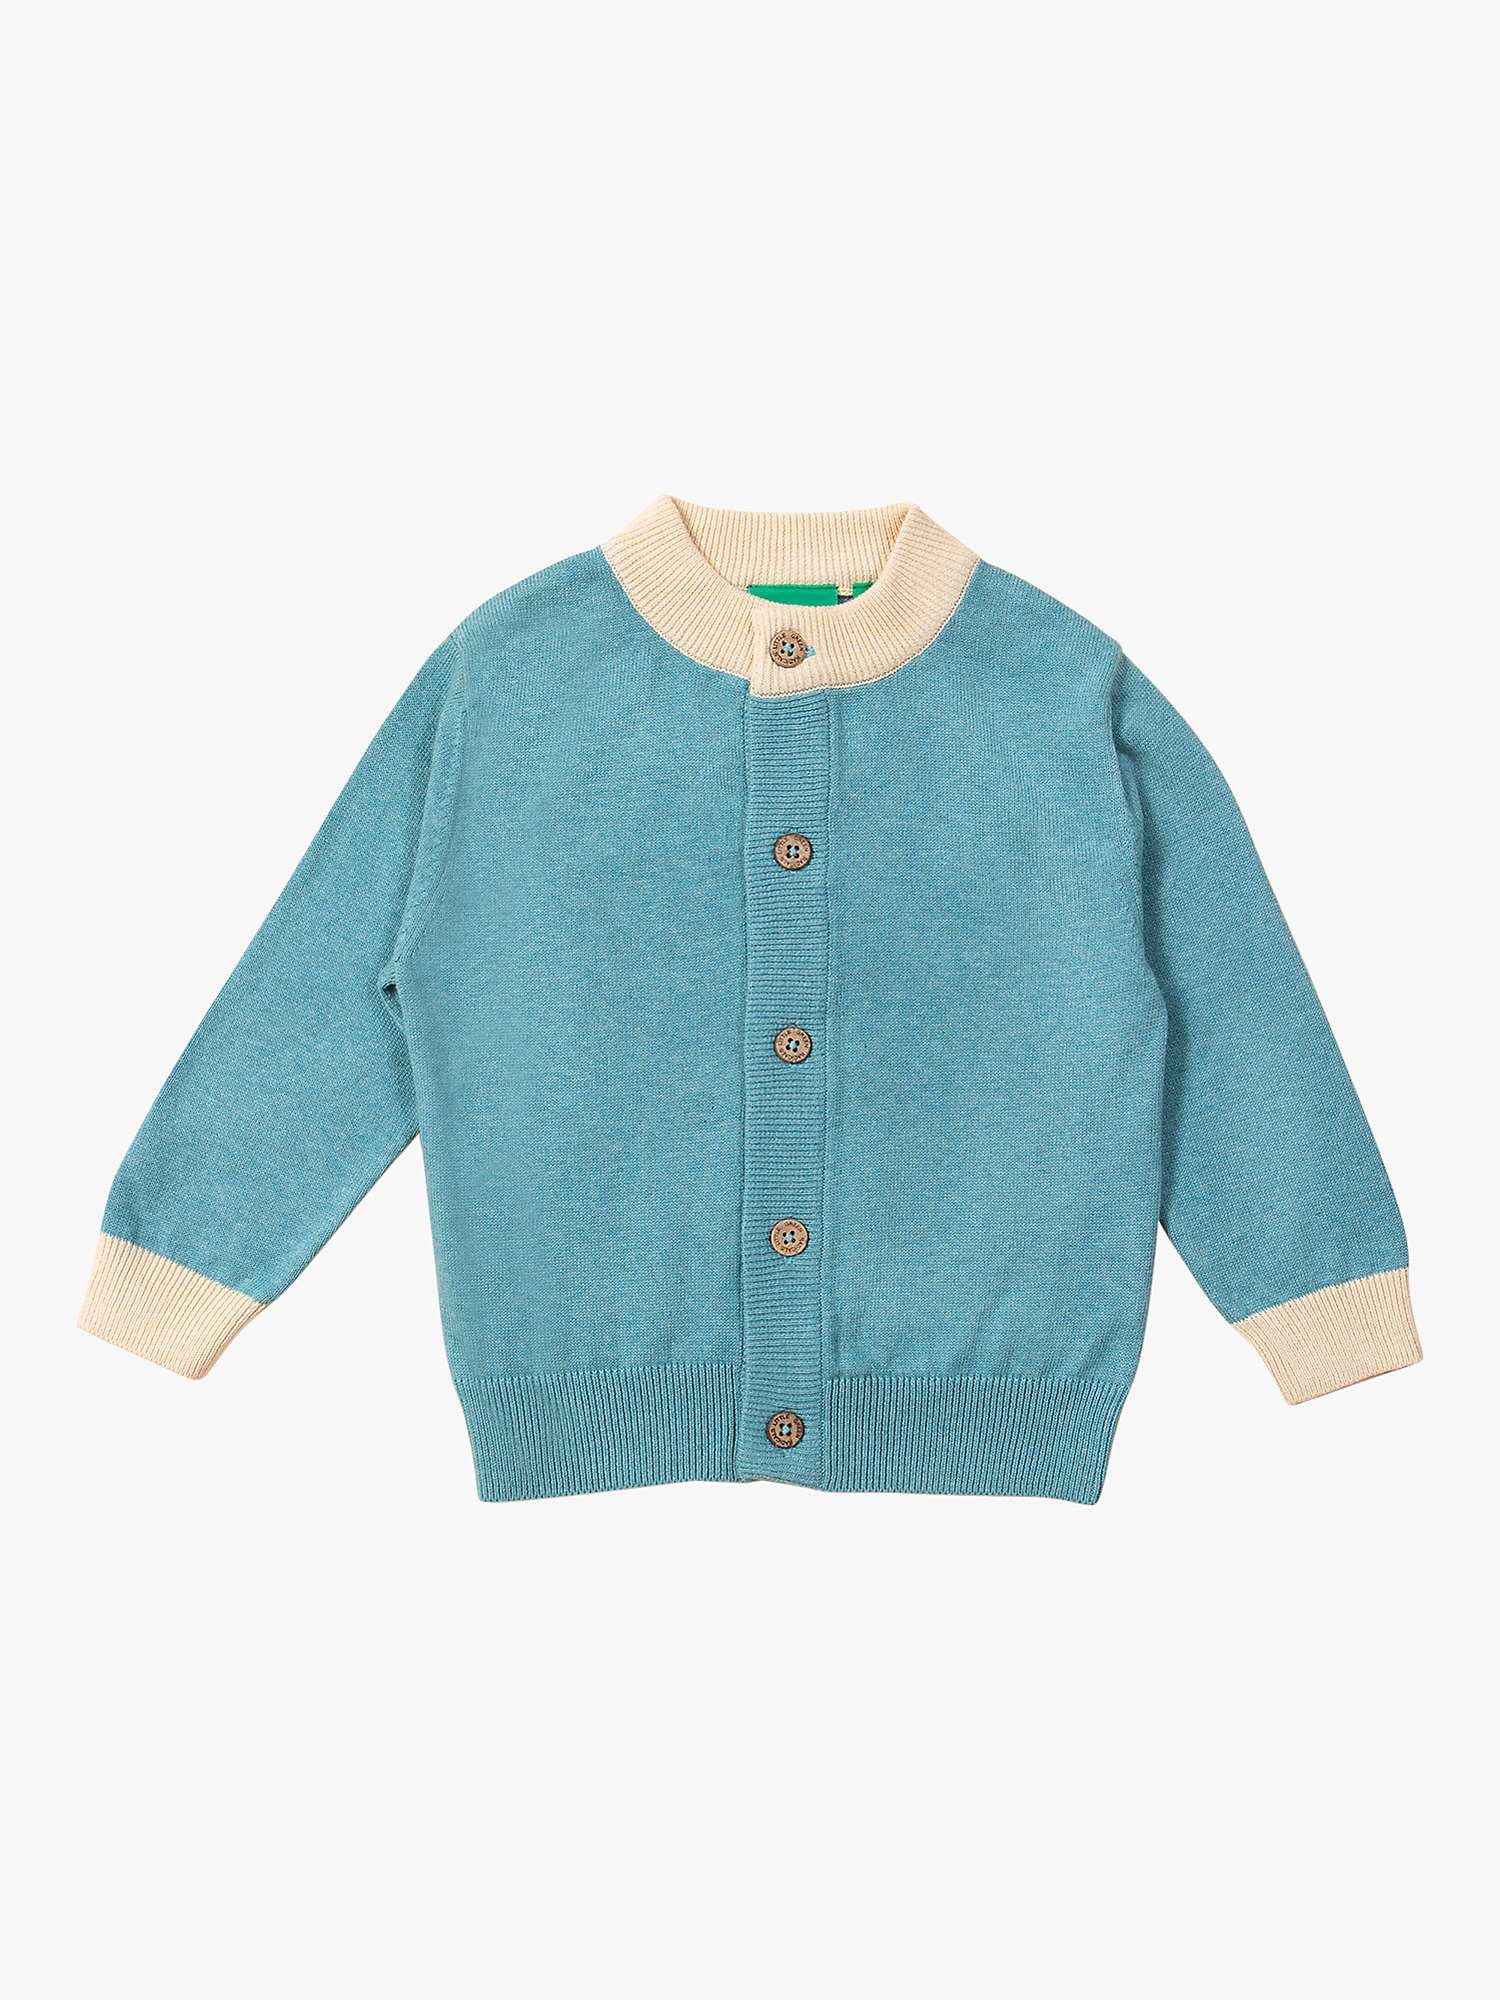 Buy Little Green Radicals Baby Organic Cotton From One To Another Sunshine Knit Cardigan, Blue Online at johnlewis.com